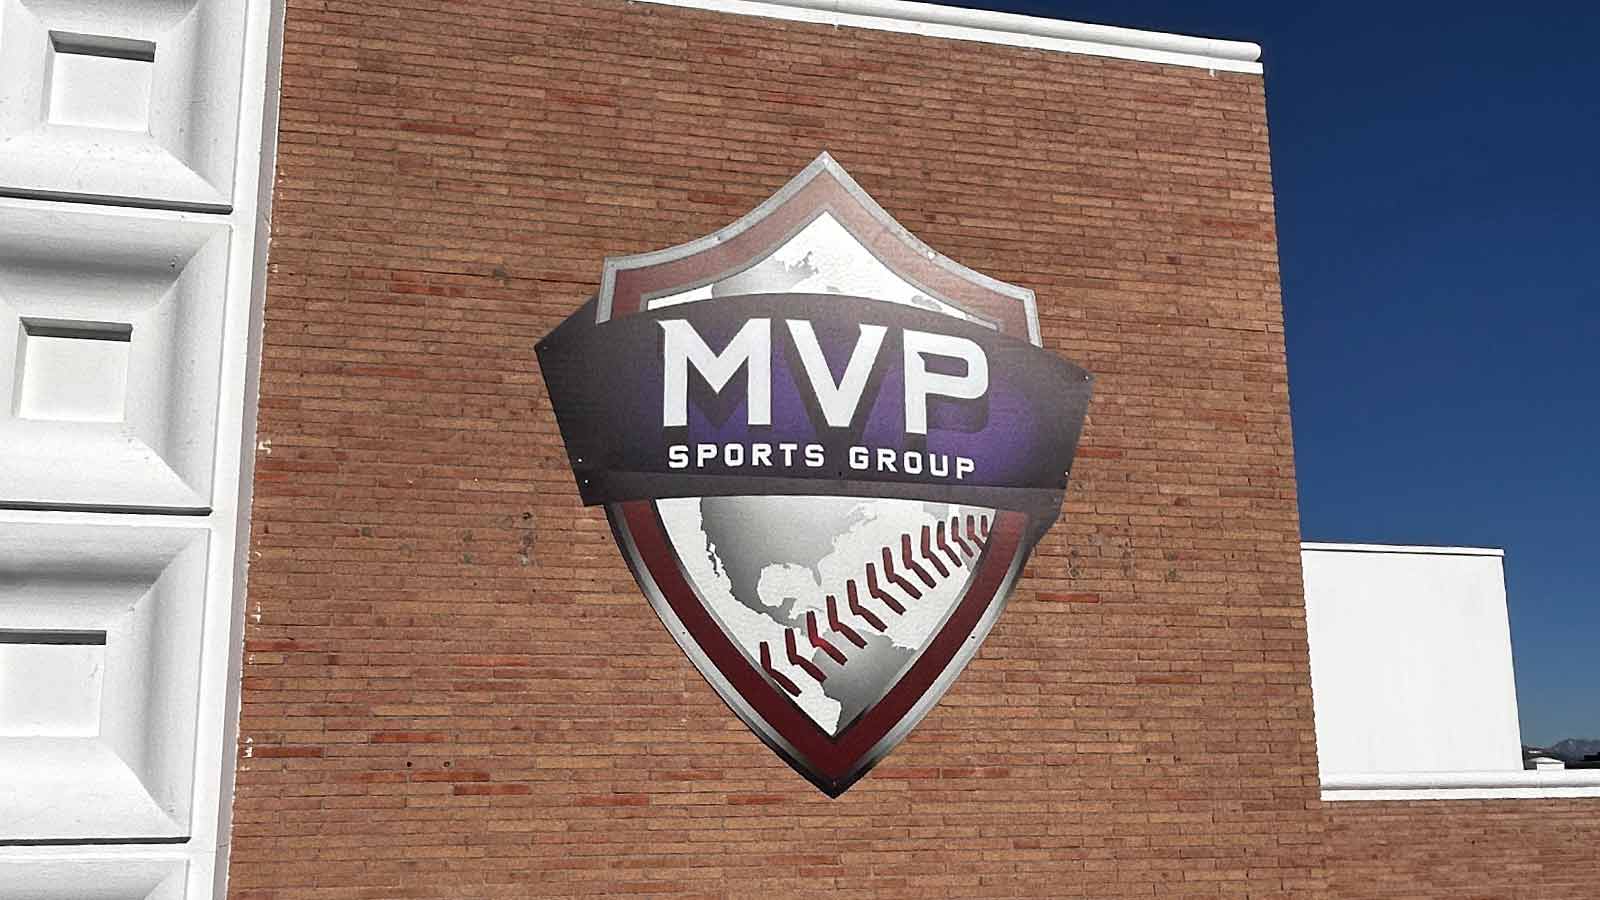 mvp sports group dibond bulding sign mounted on the wall